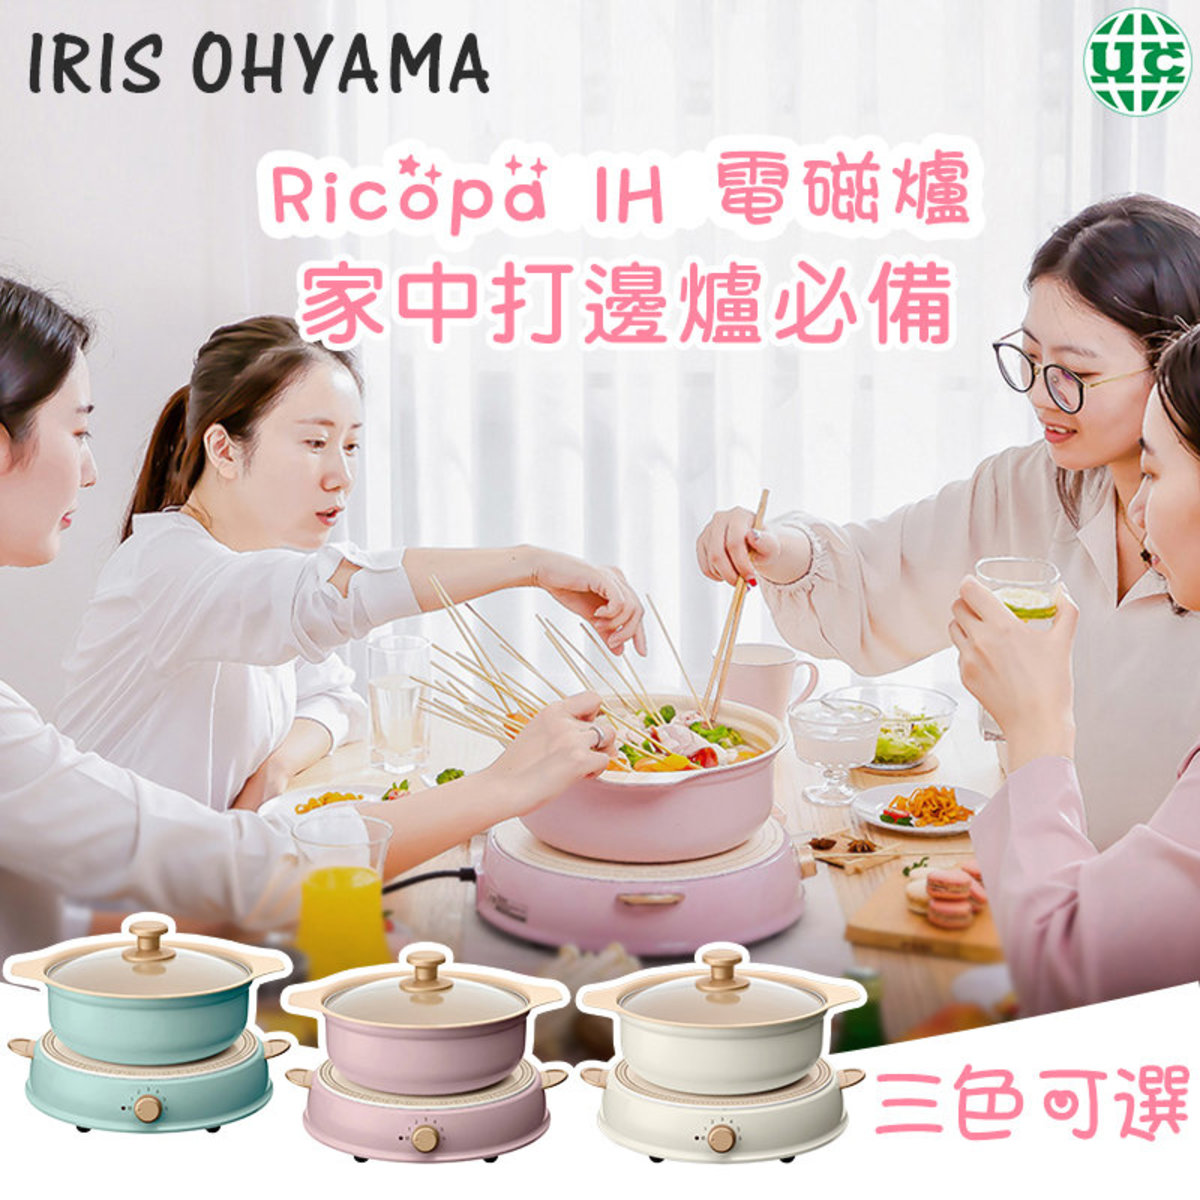 Ricopa IH Induction Cooker Essential for edging stove, suitable for many kinds of pans-pink